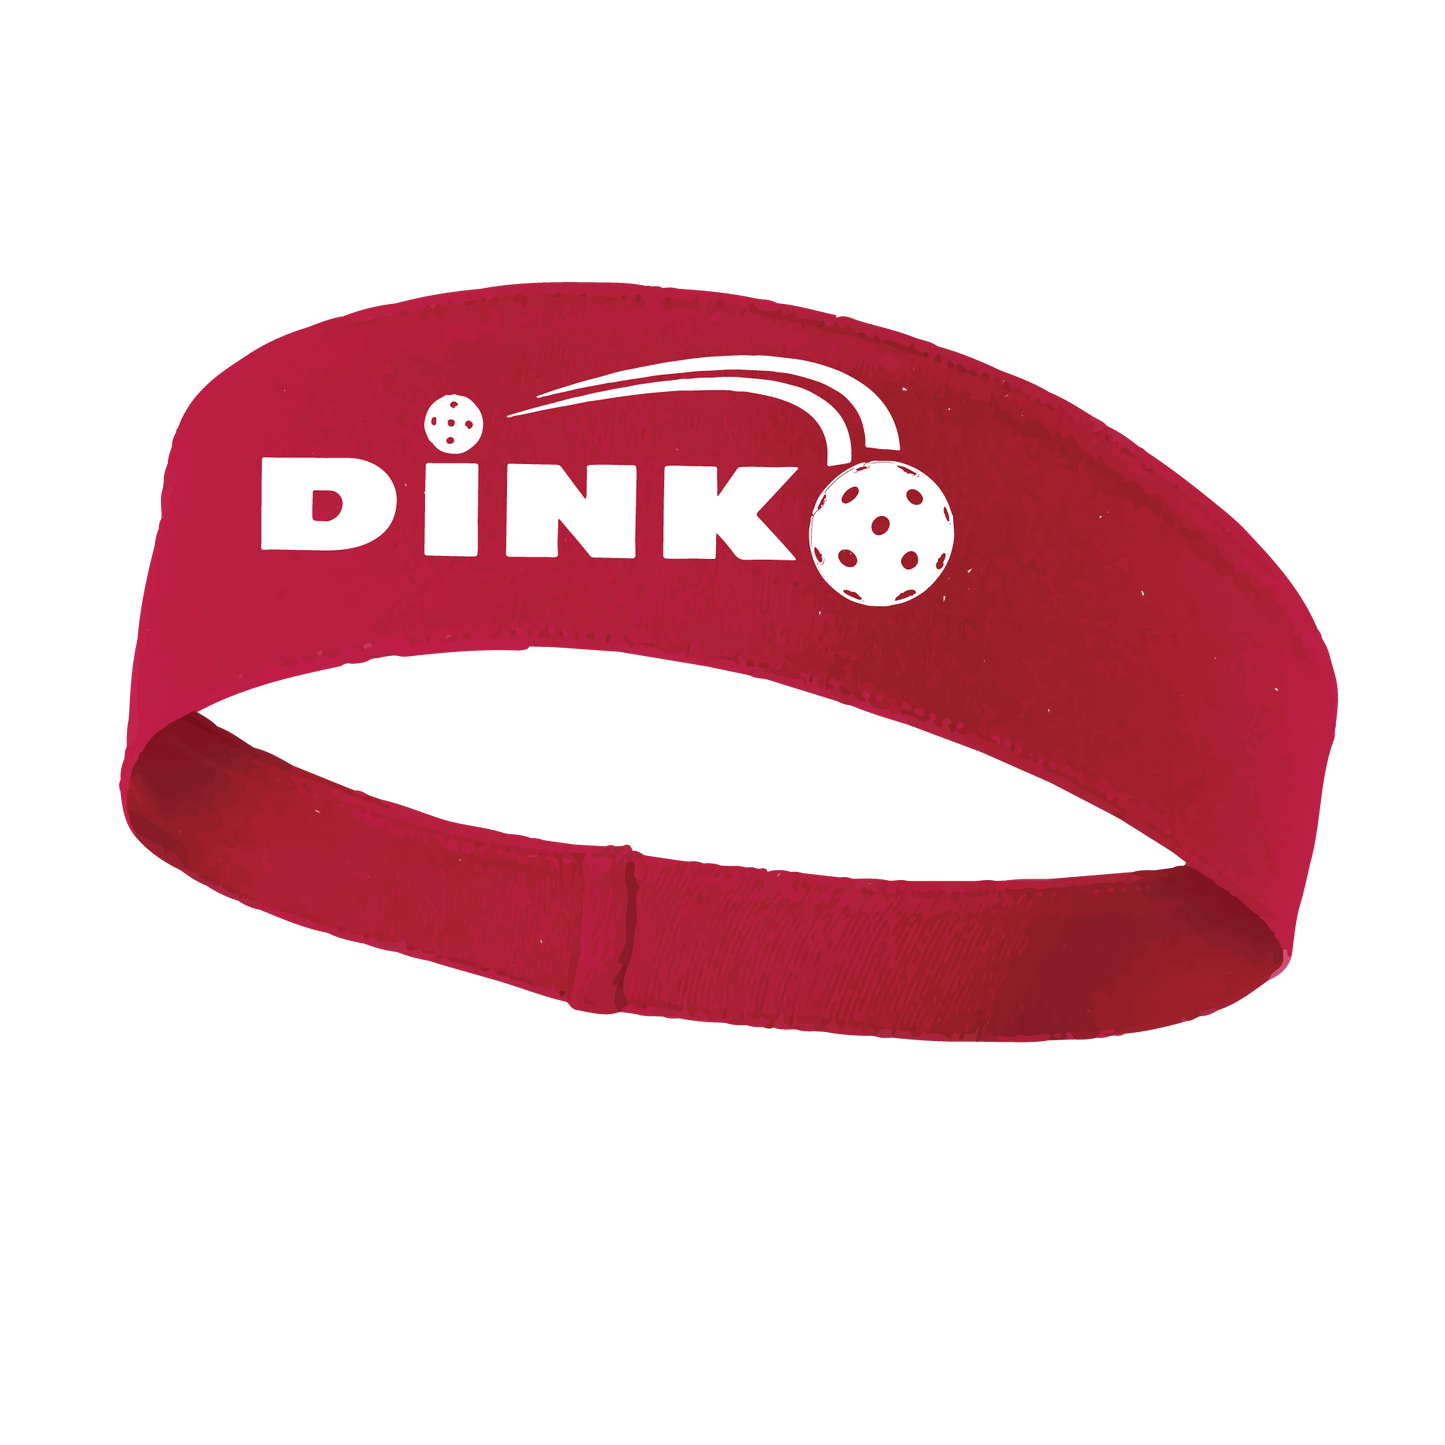 Pickleball Design: Dink  This fun, pickleball designed, moisture-wicking headband narrows in the back to fit more securely. Single-needle top-stitched edging. These headbands come in a variety of colors. Truly shows your love for the sport of pickleball!!